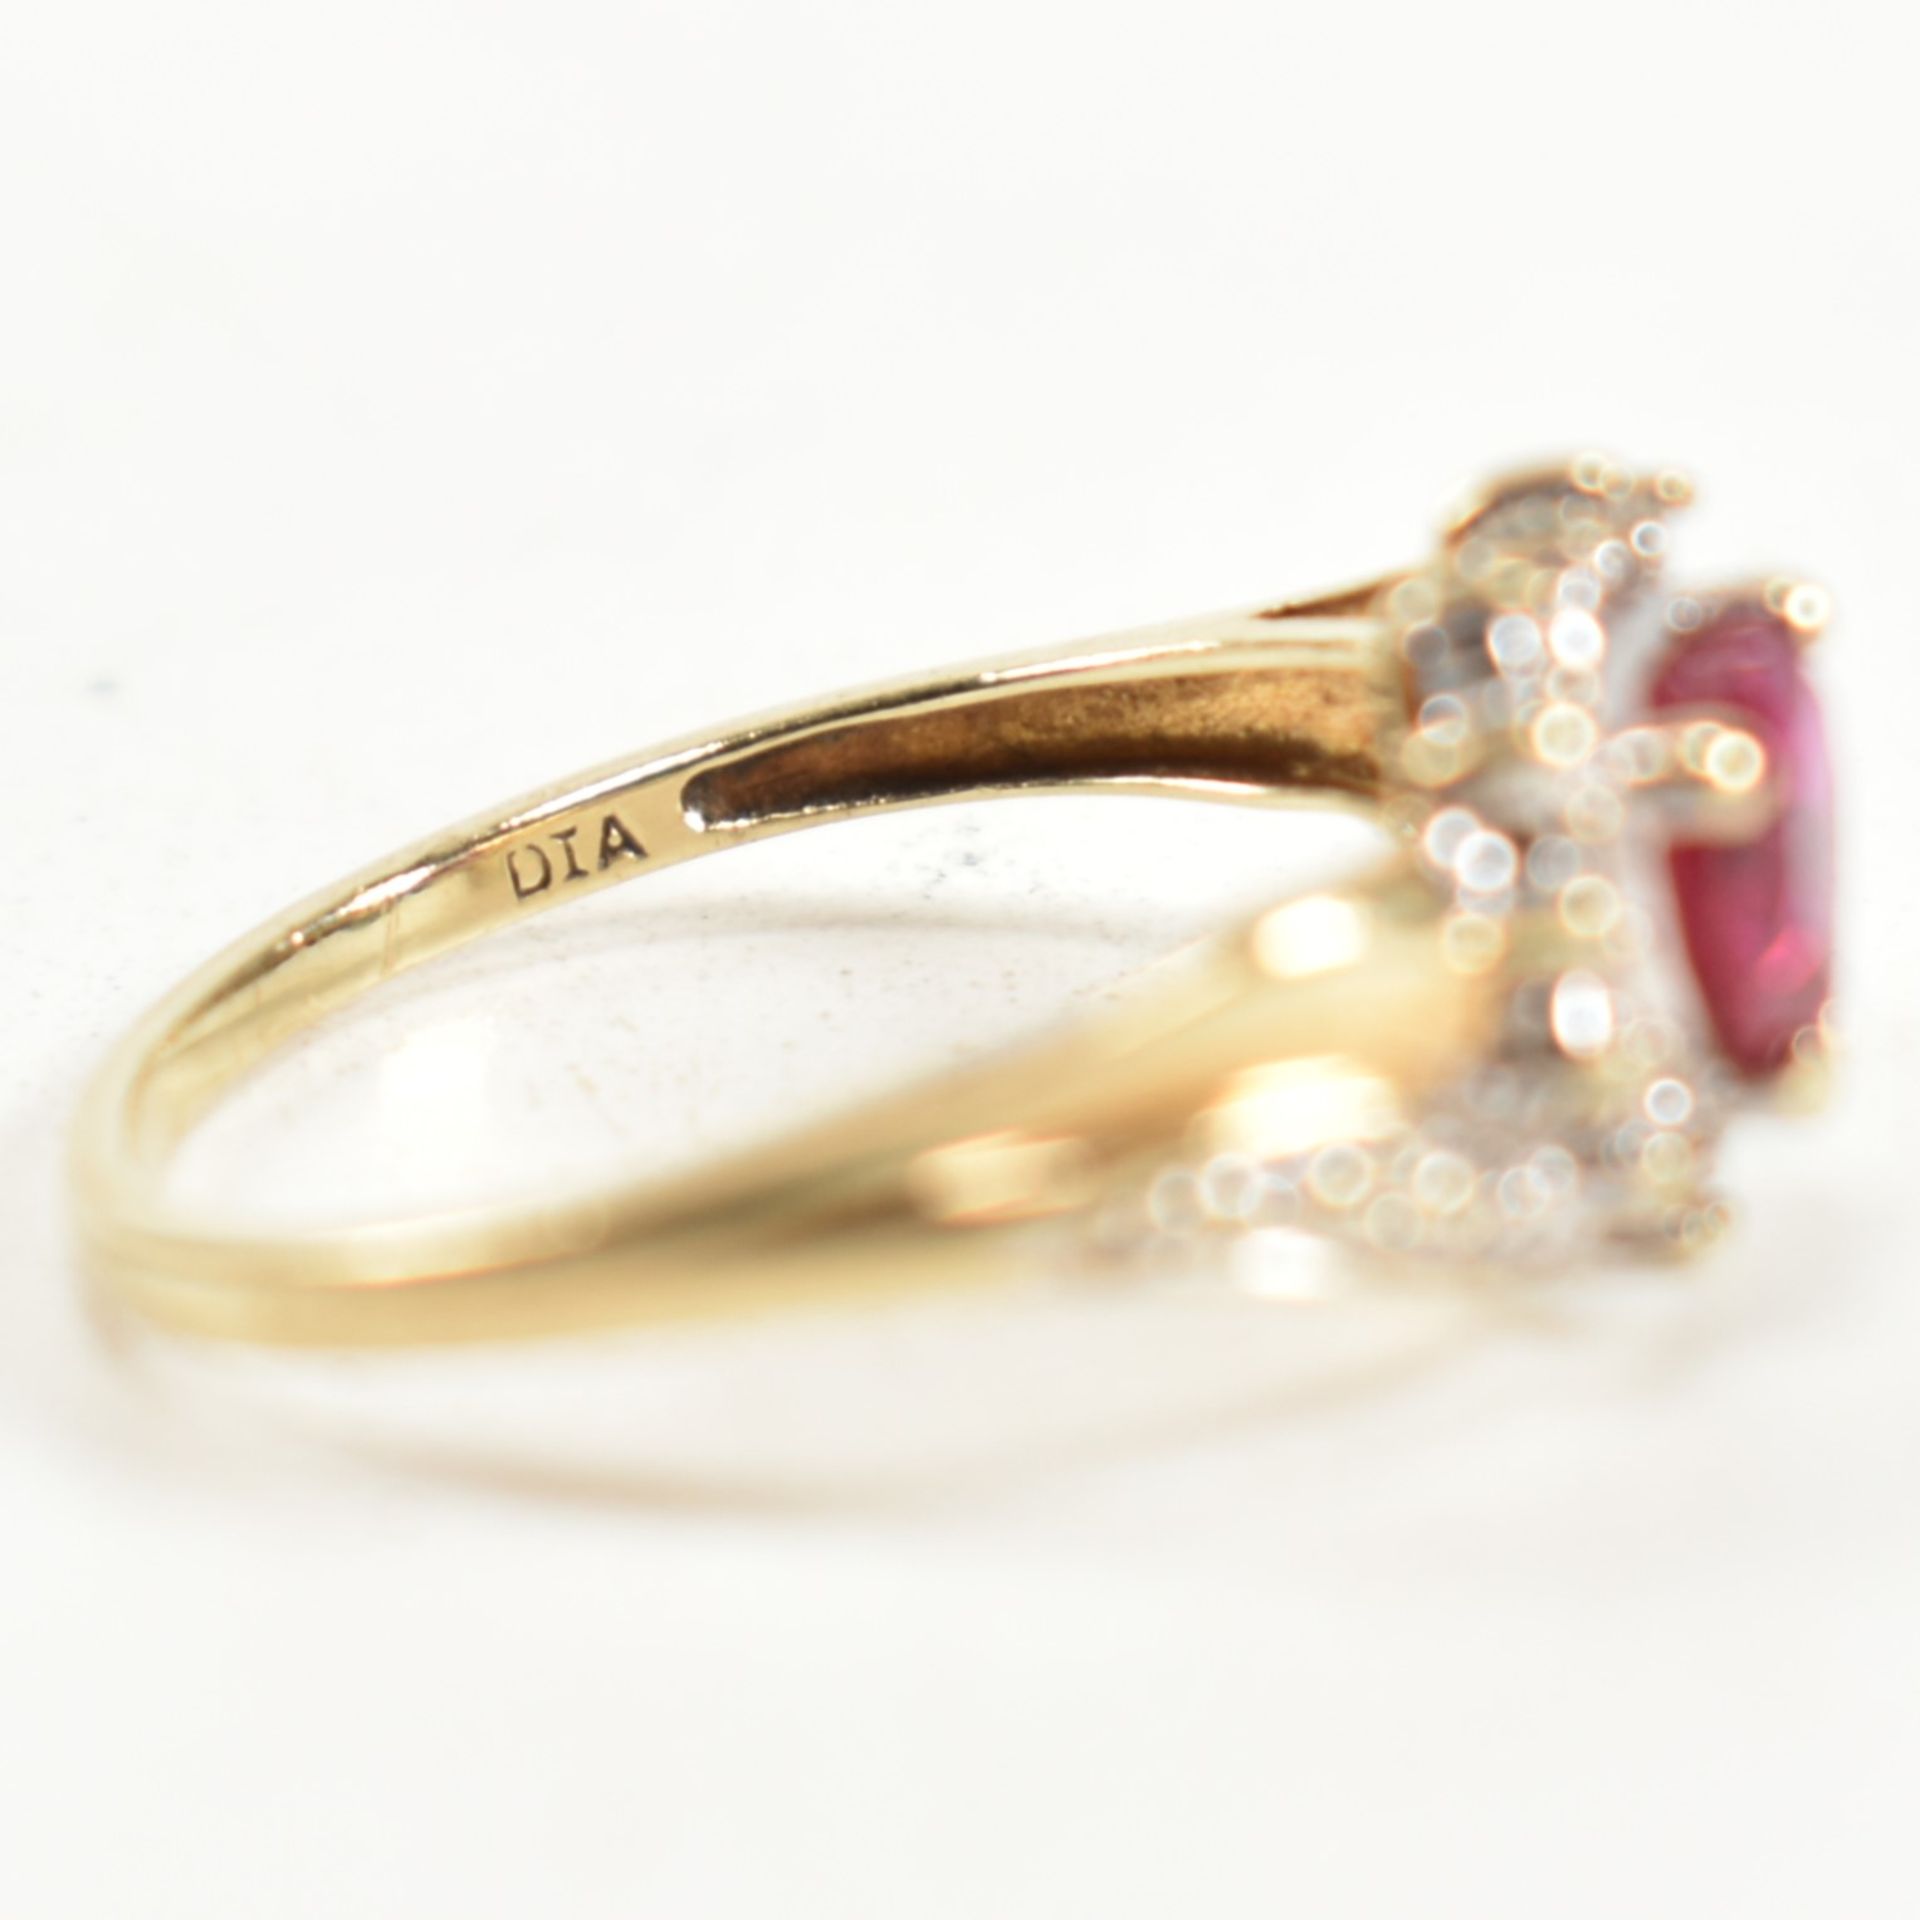 HALLMARKED 9CT GOLD DIAMOND & RUBY CLUSTER RING - Image 9 of 10